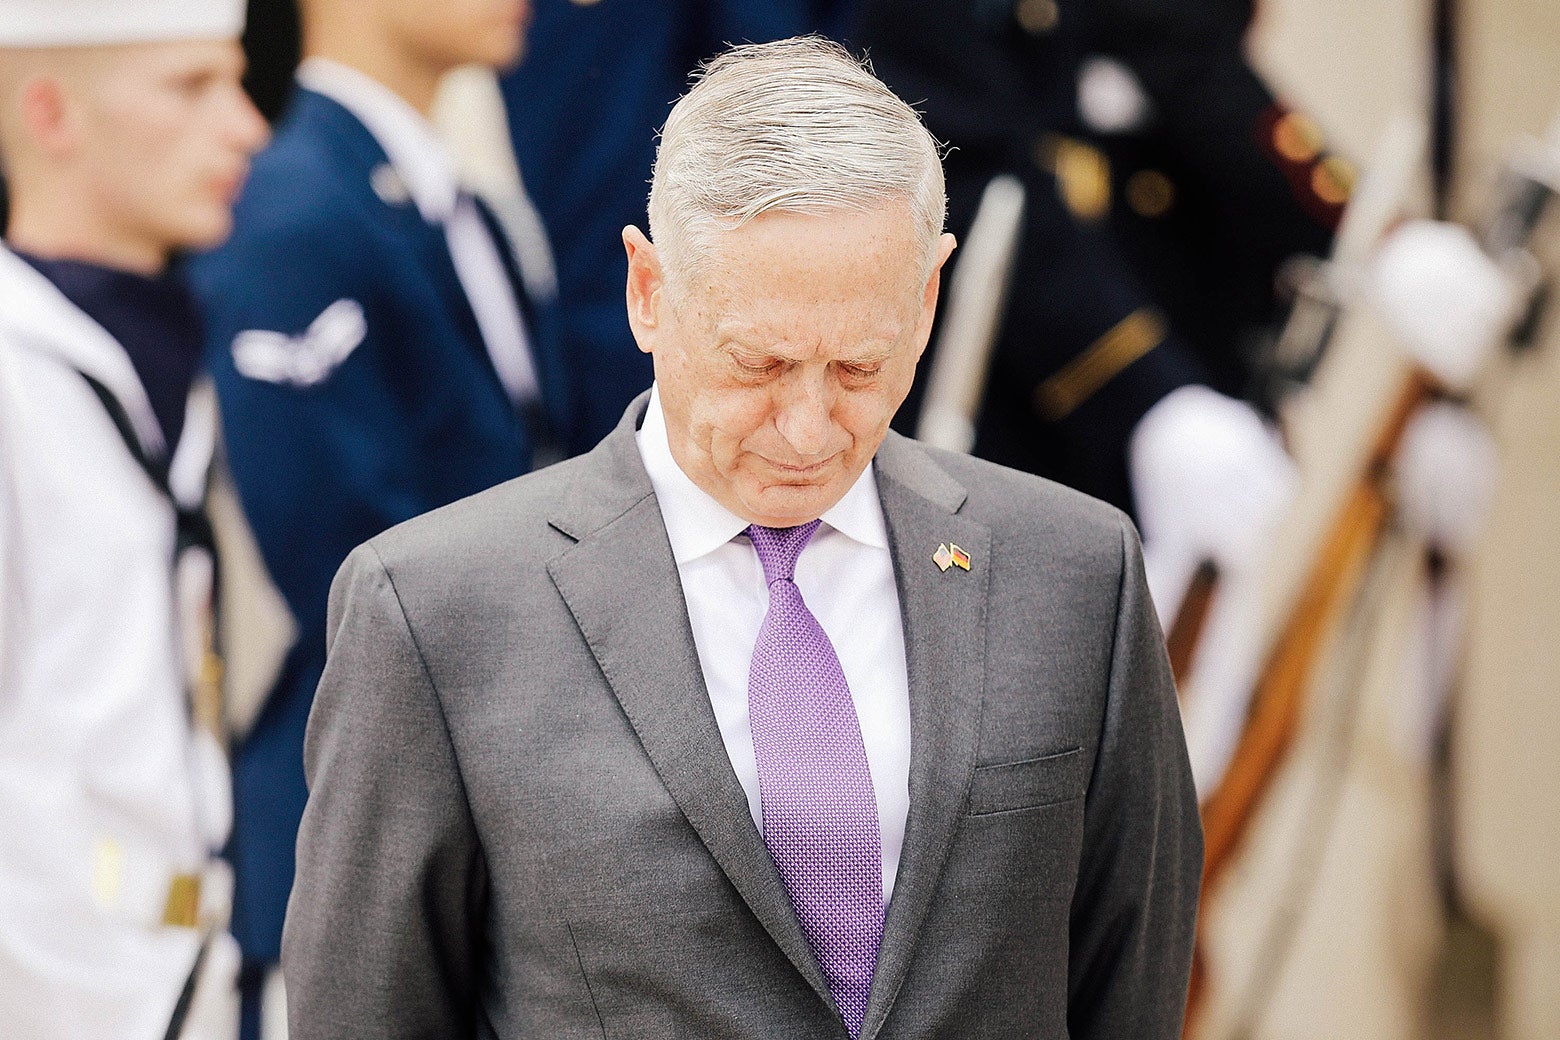 Secretary of Defense James Mattis looks at the ground as he waits for Germany's defense minister to arrive at the Pentagon in Virginia on Wednesday.